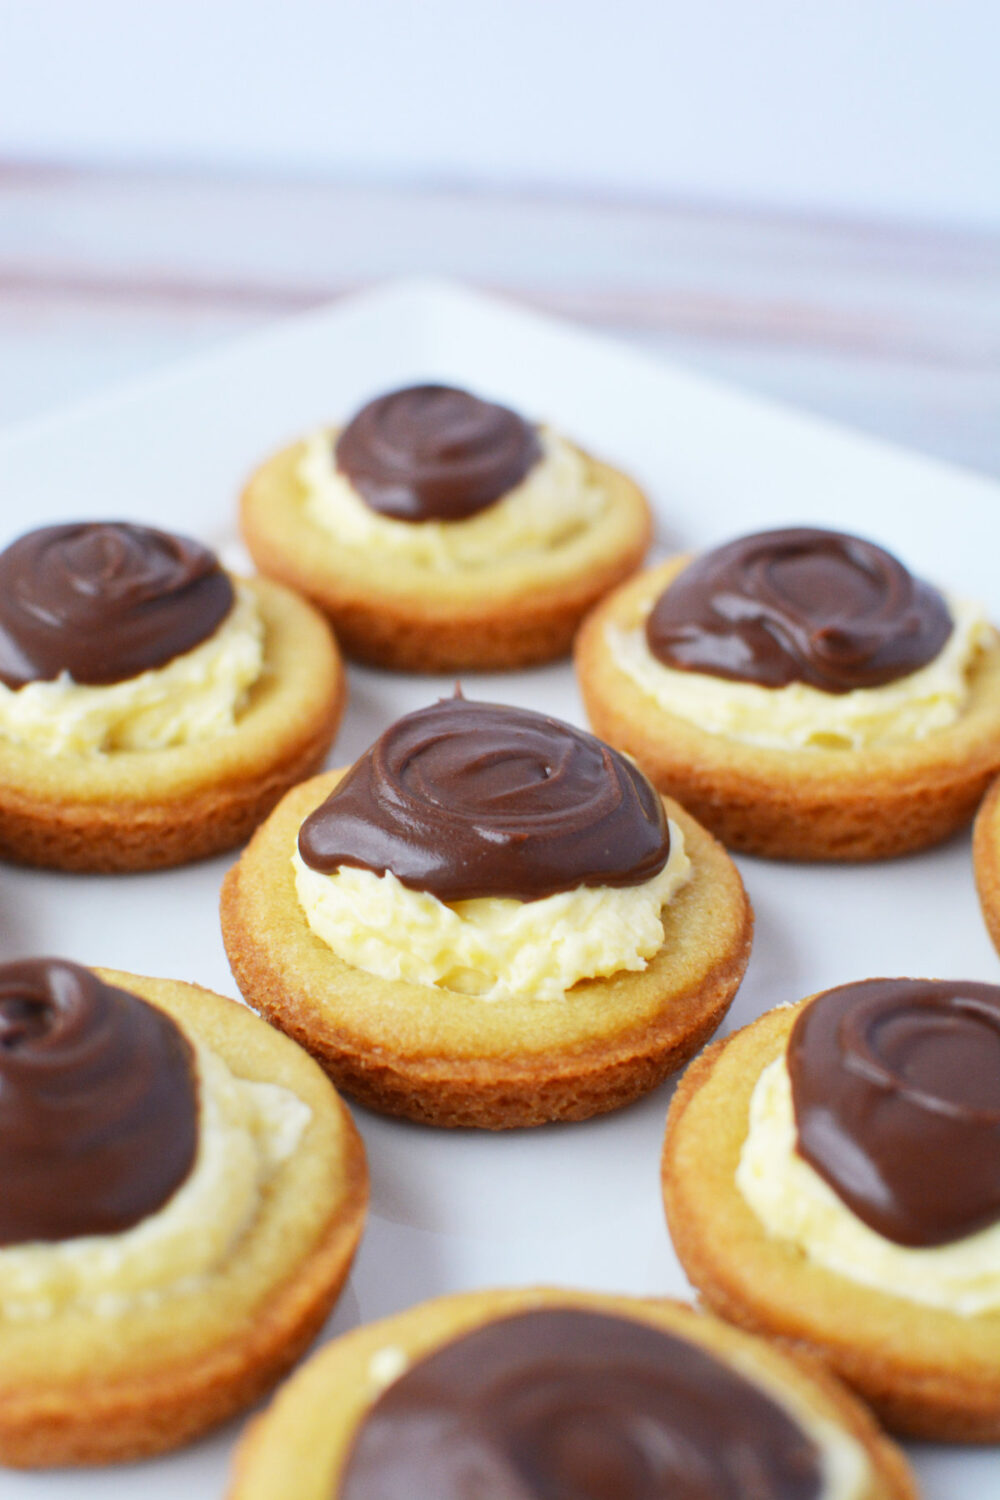 Boston cream pie cookies topped with chocolate ganache on a plate.